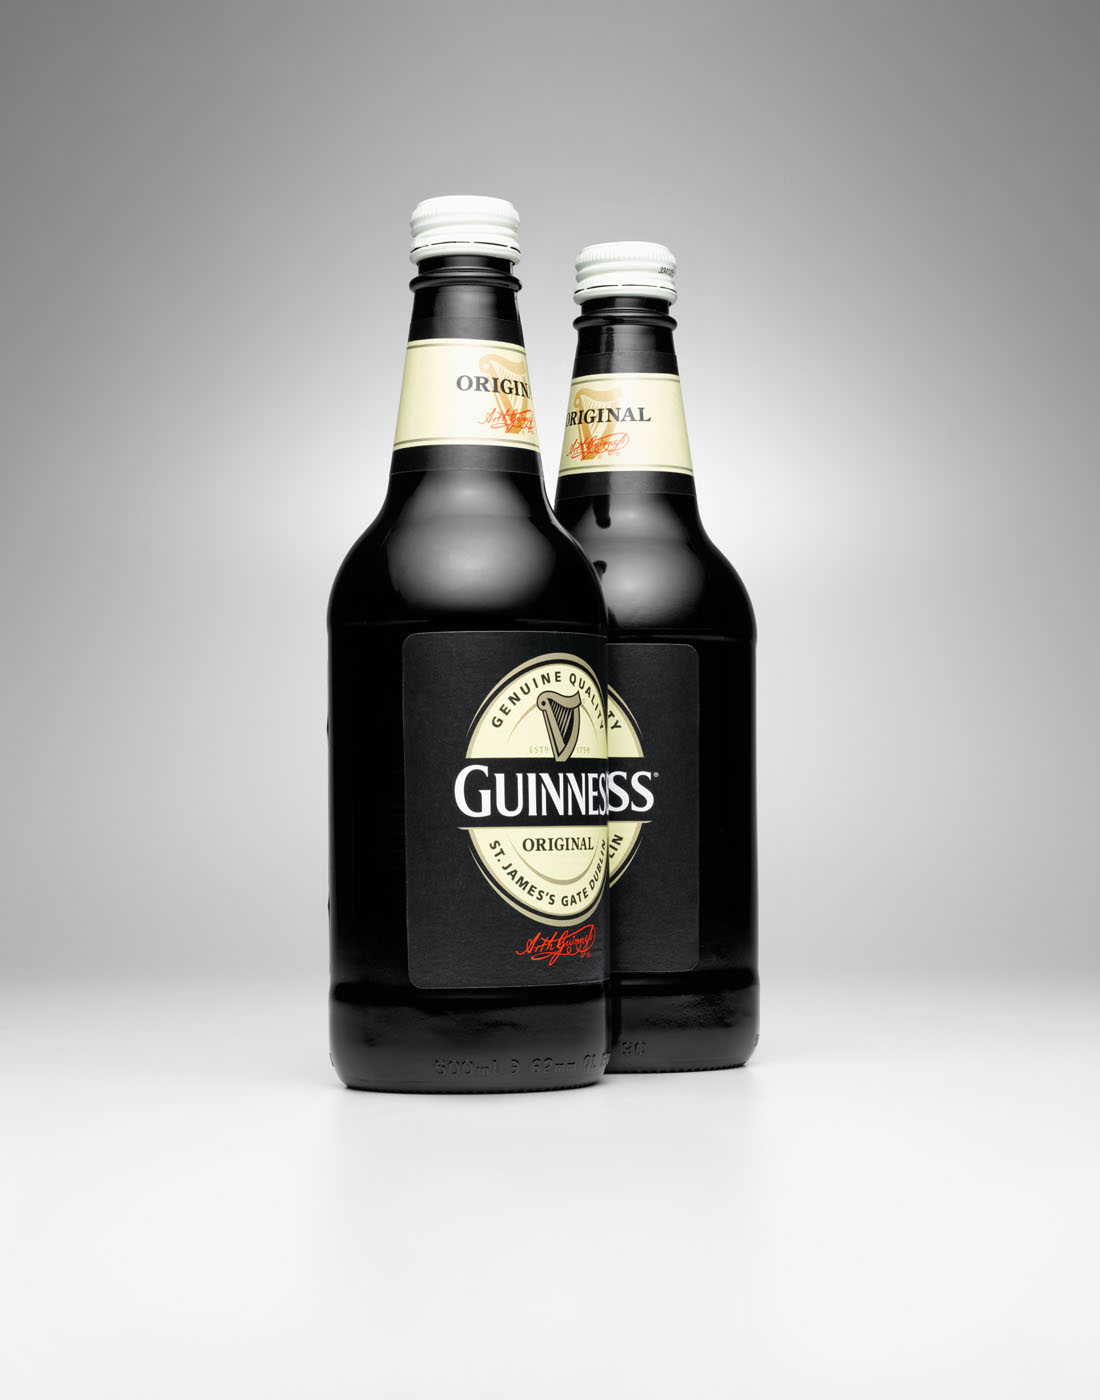 Guinness alcohol bottle by Alexander Kent London based still life and product photographer.